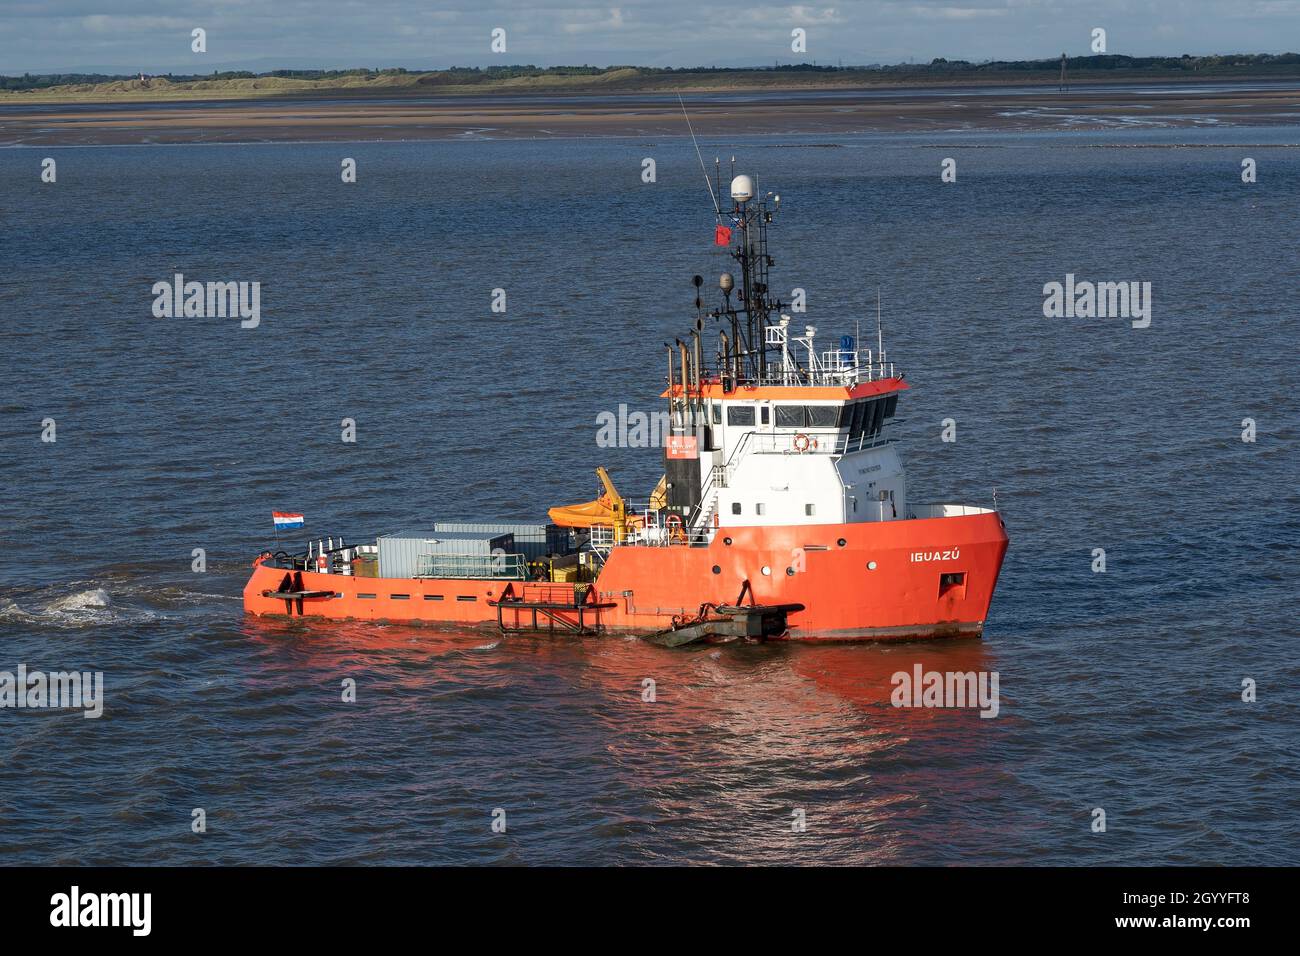 The water injection dredger Iguazu sailing on the Irish Sea near the approach to the River Mersey Liverpool UK Stock Photo